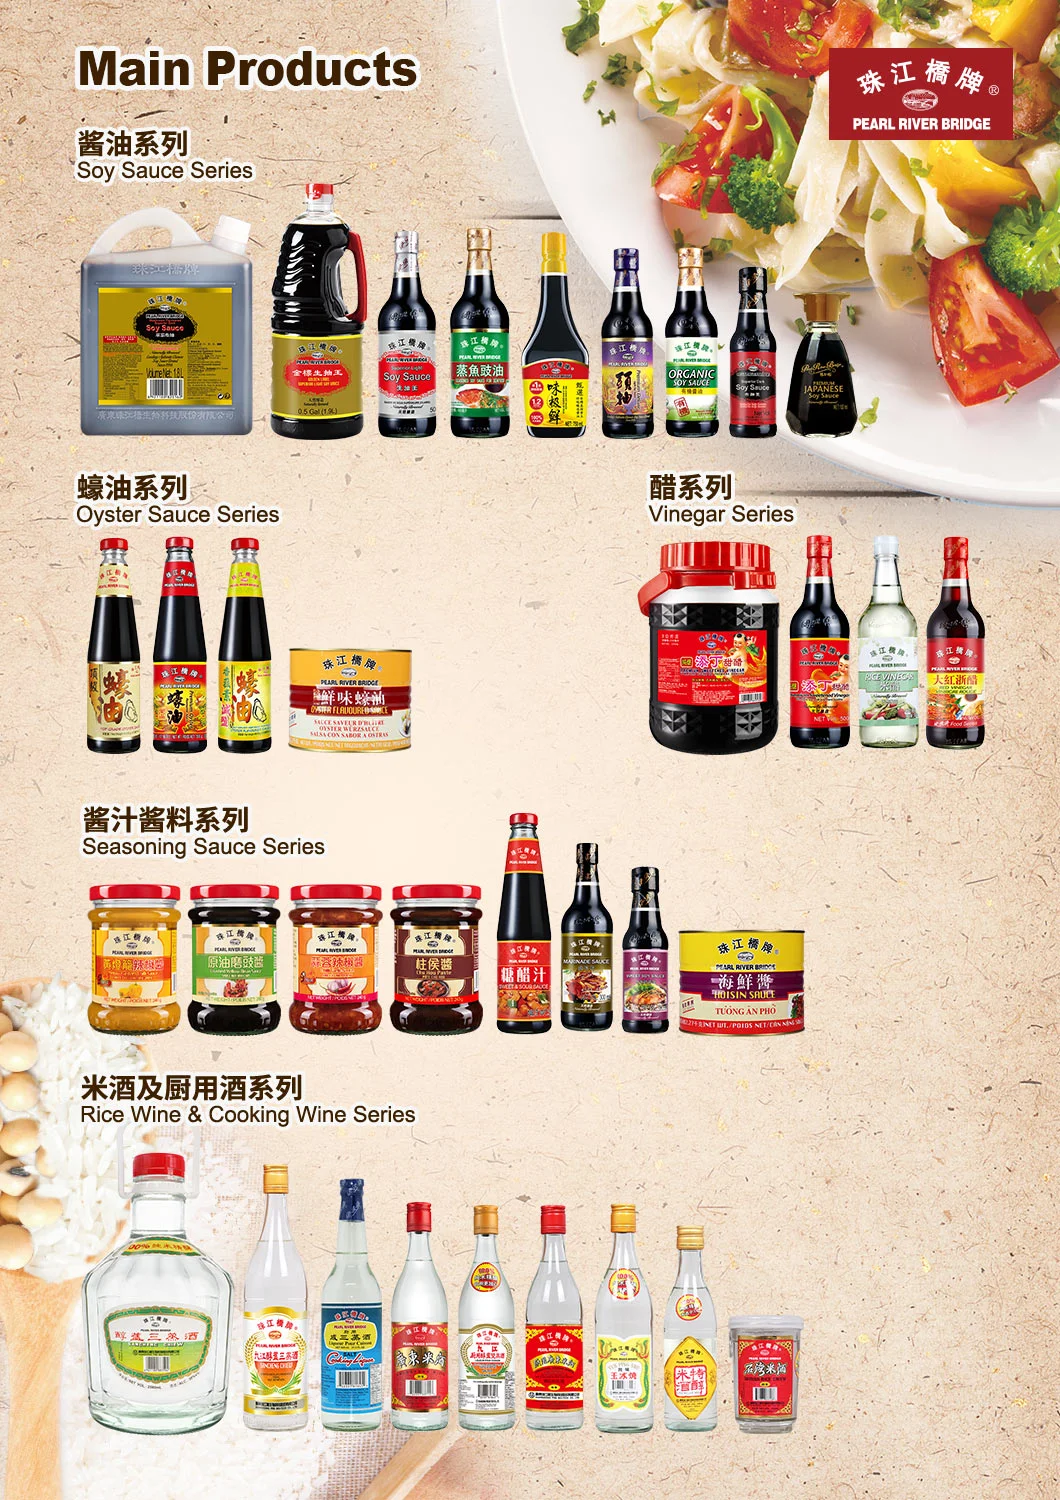 Pearl River Bridge High-Grade Light Soy Sauce 150ml Healthy and High Quality Food Additive